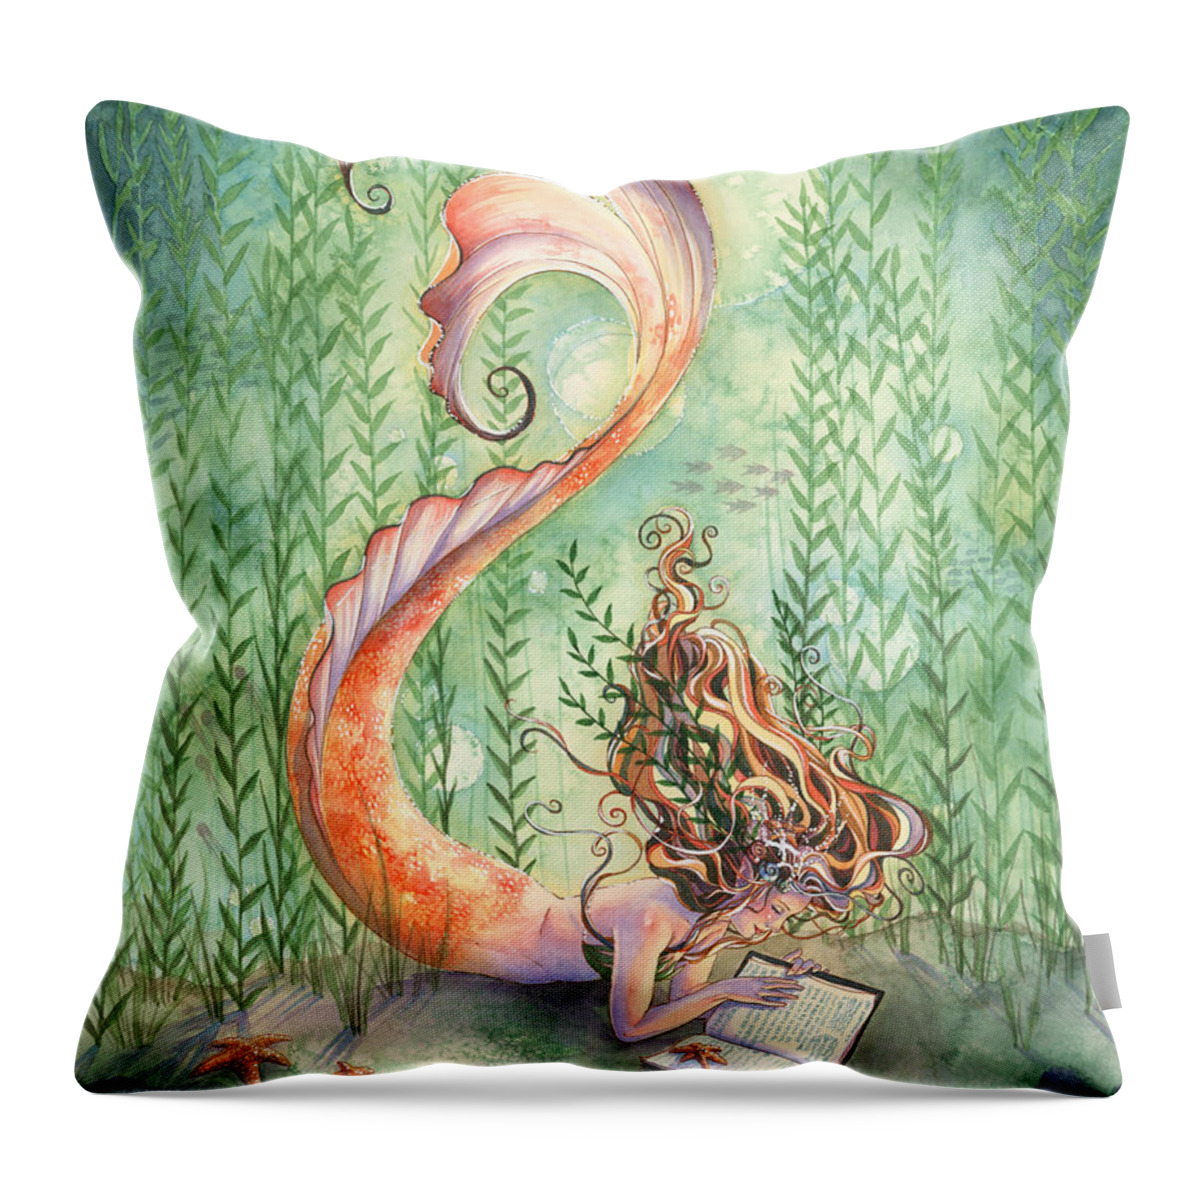 Mermaid Throw Pillow featuring the painting Quiet Time by Sara Burrier